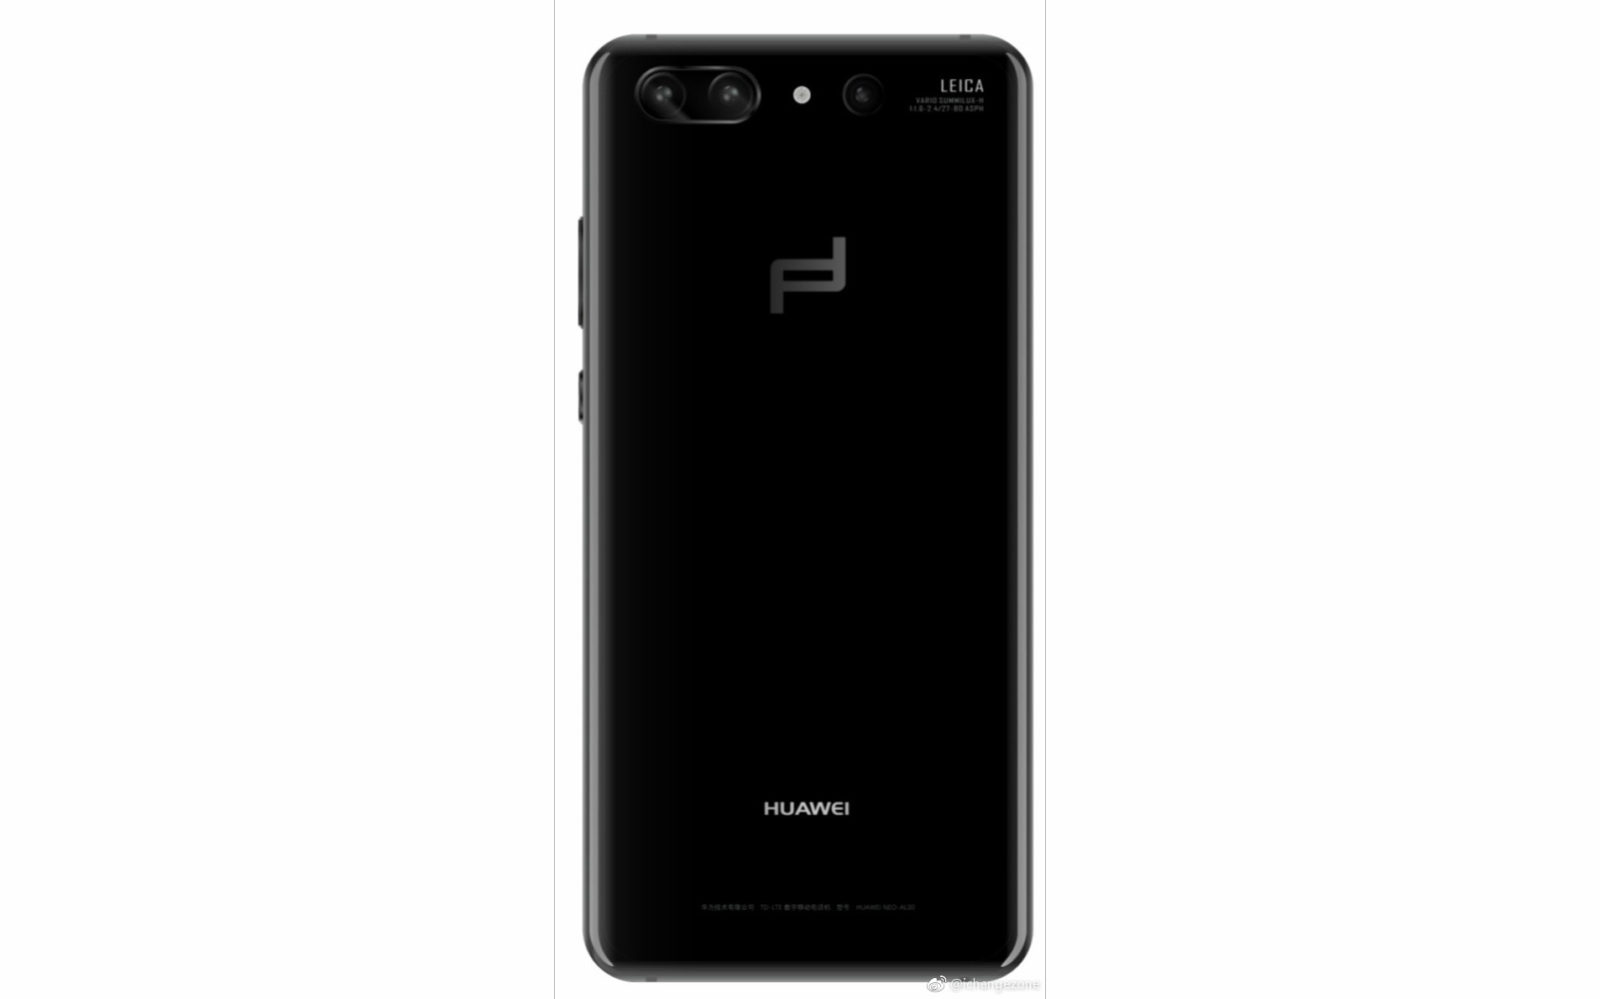 Huawei P20 Porsche Design is credited with a sub-screen fingerprint scanner and a price tag of $ 1,576